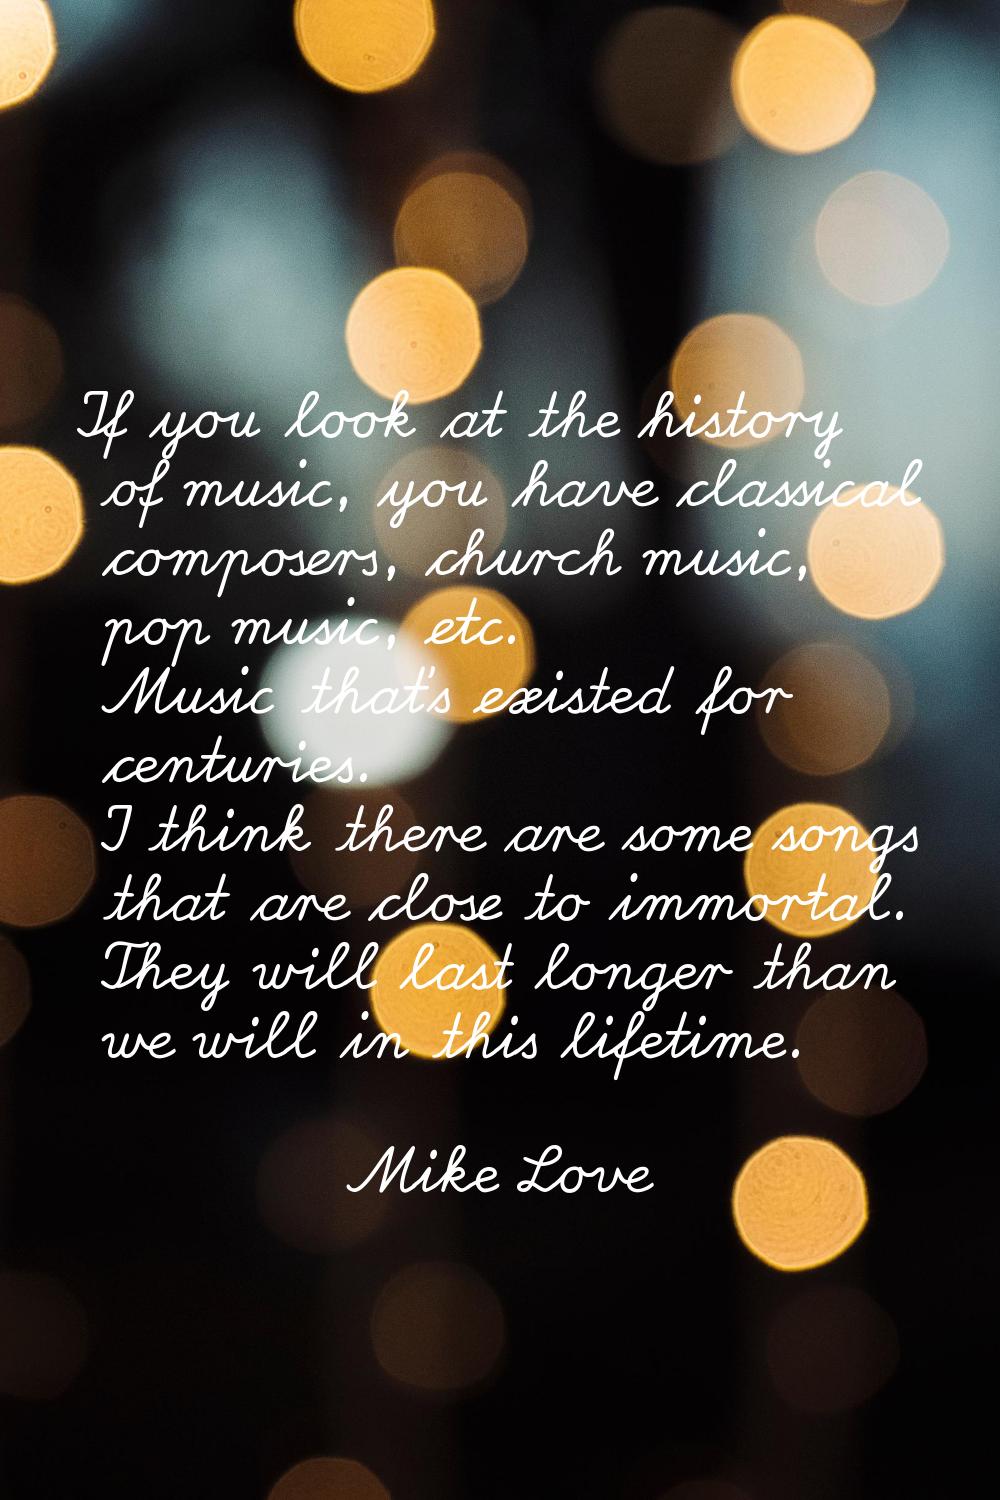 If you look at the history of music, you have classical composers, church music, pop music, etc. Mu